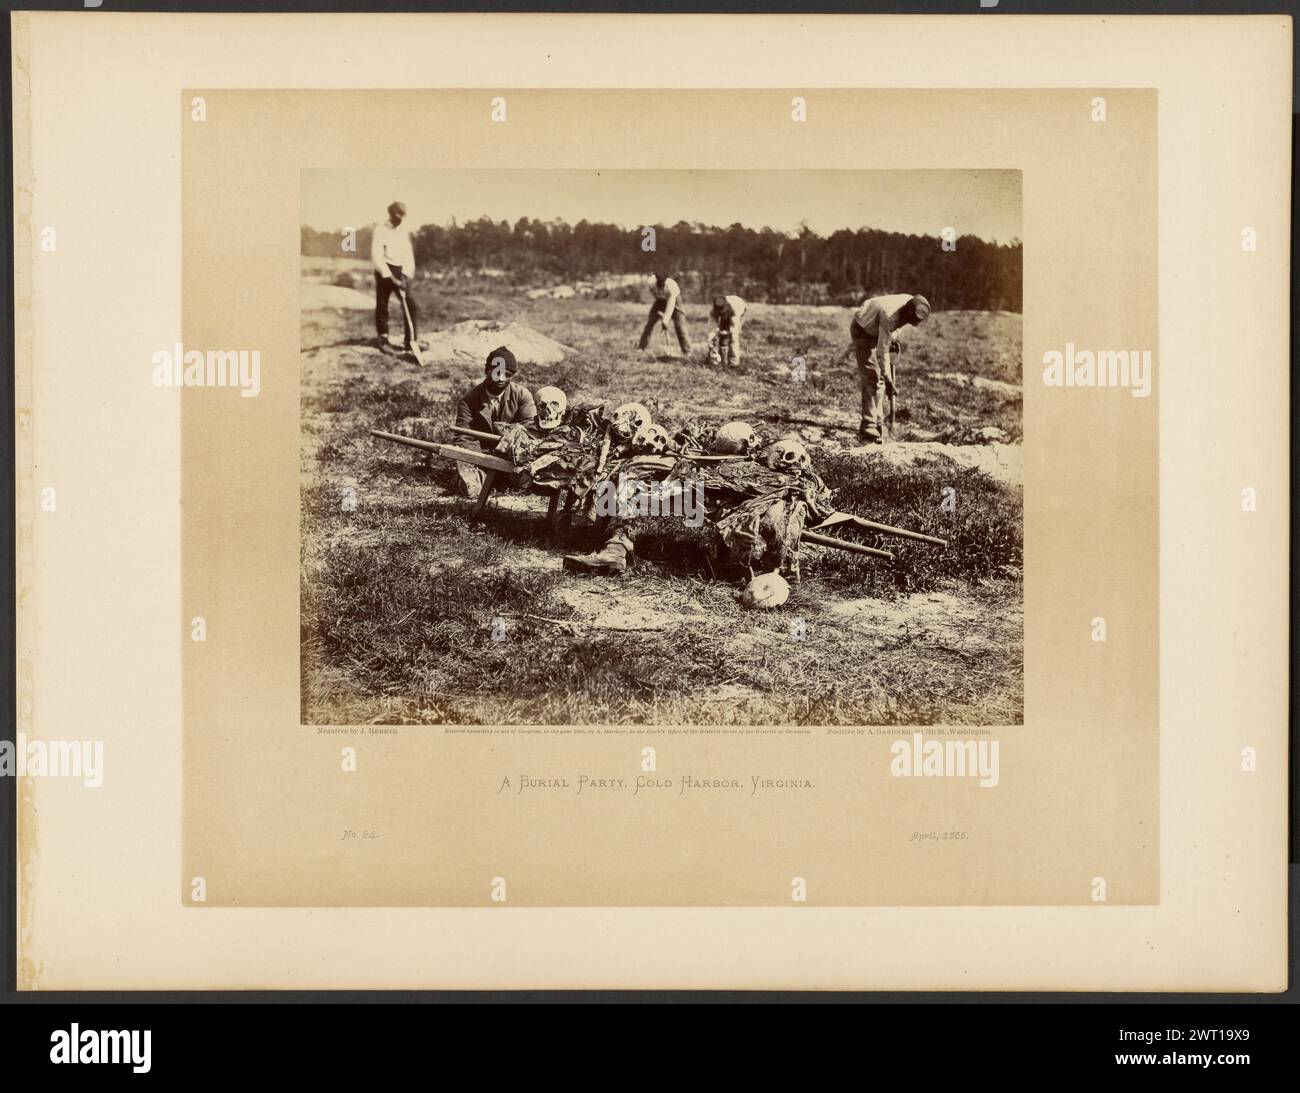 A Burial Party, Cold Harbor, Virginia. John Reekie, photographer (American, active 1860s) Print by Alexander Gardner, maker (American, born Scotland, 1821 - 1882) April 1865 This gruesome scene depicts the unpleasant job of burying the remains of fallen Union soldiers from the June 1864 battles of Gaines' Mill and Cold Harbor. This task has fallen to a group of black men doing the menial work while a white man standing at upper left acts as overseer. The man seated in the center, next to the stretcher laden with human parts, looks directly at the camera, revealing no emotion that can be reconc Stock Photo